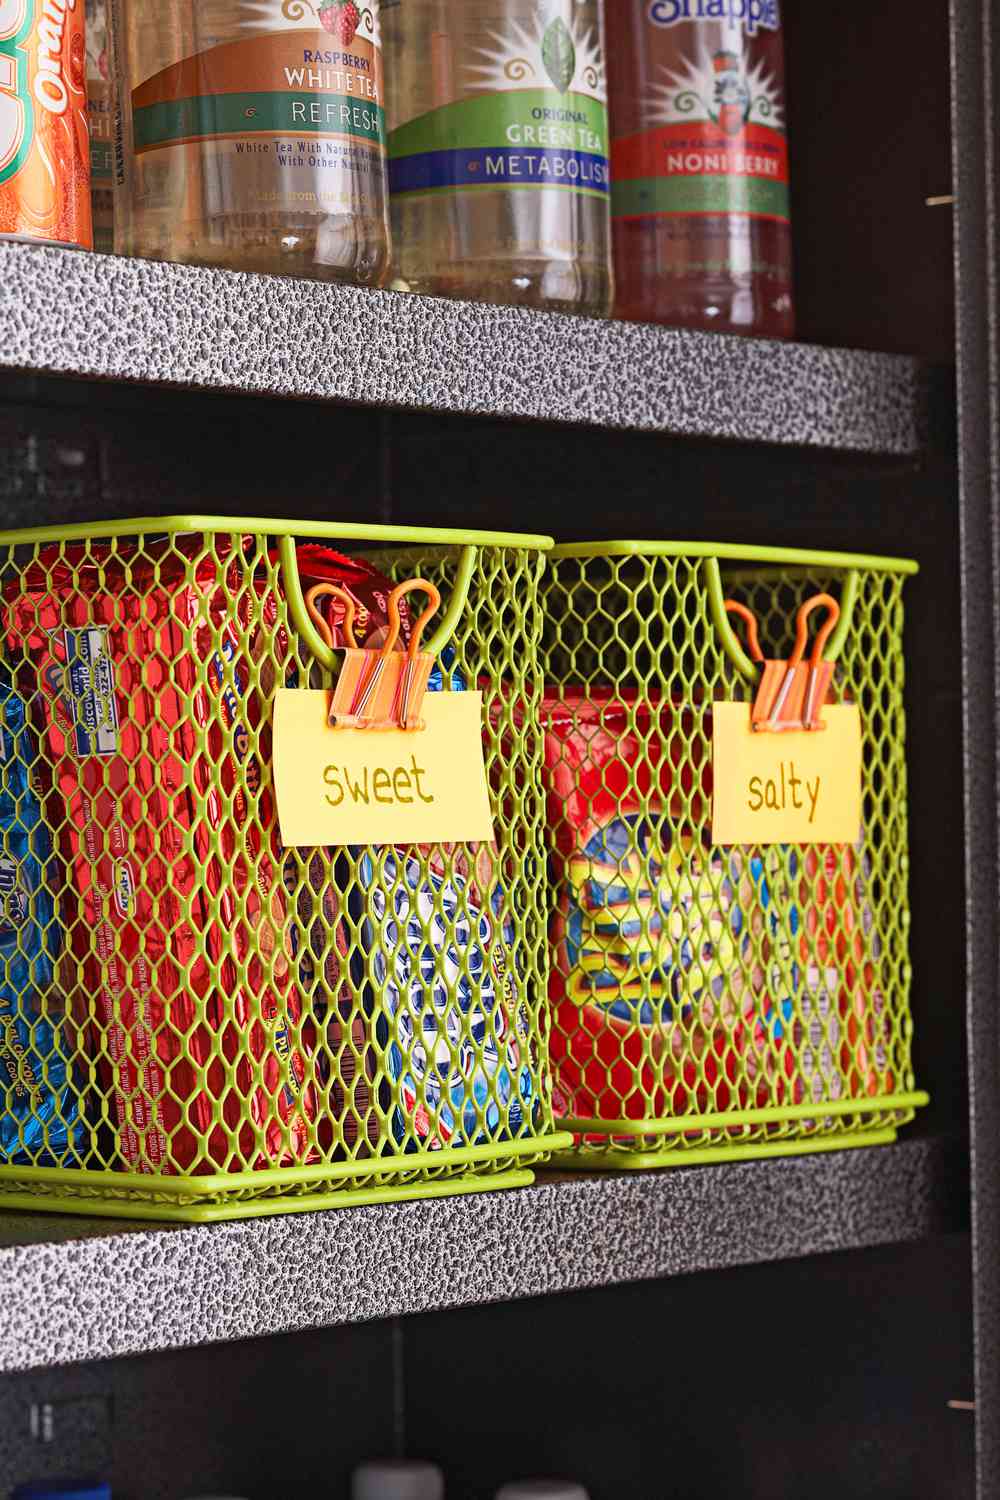 More organizing and storage ideas